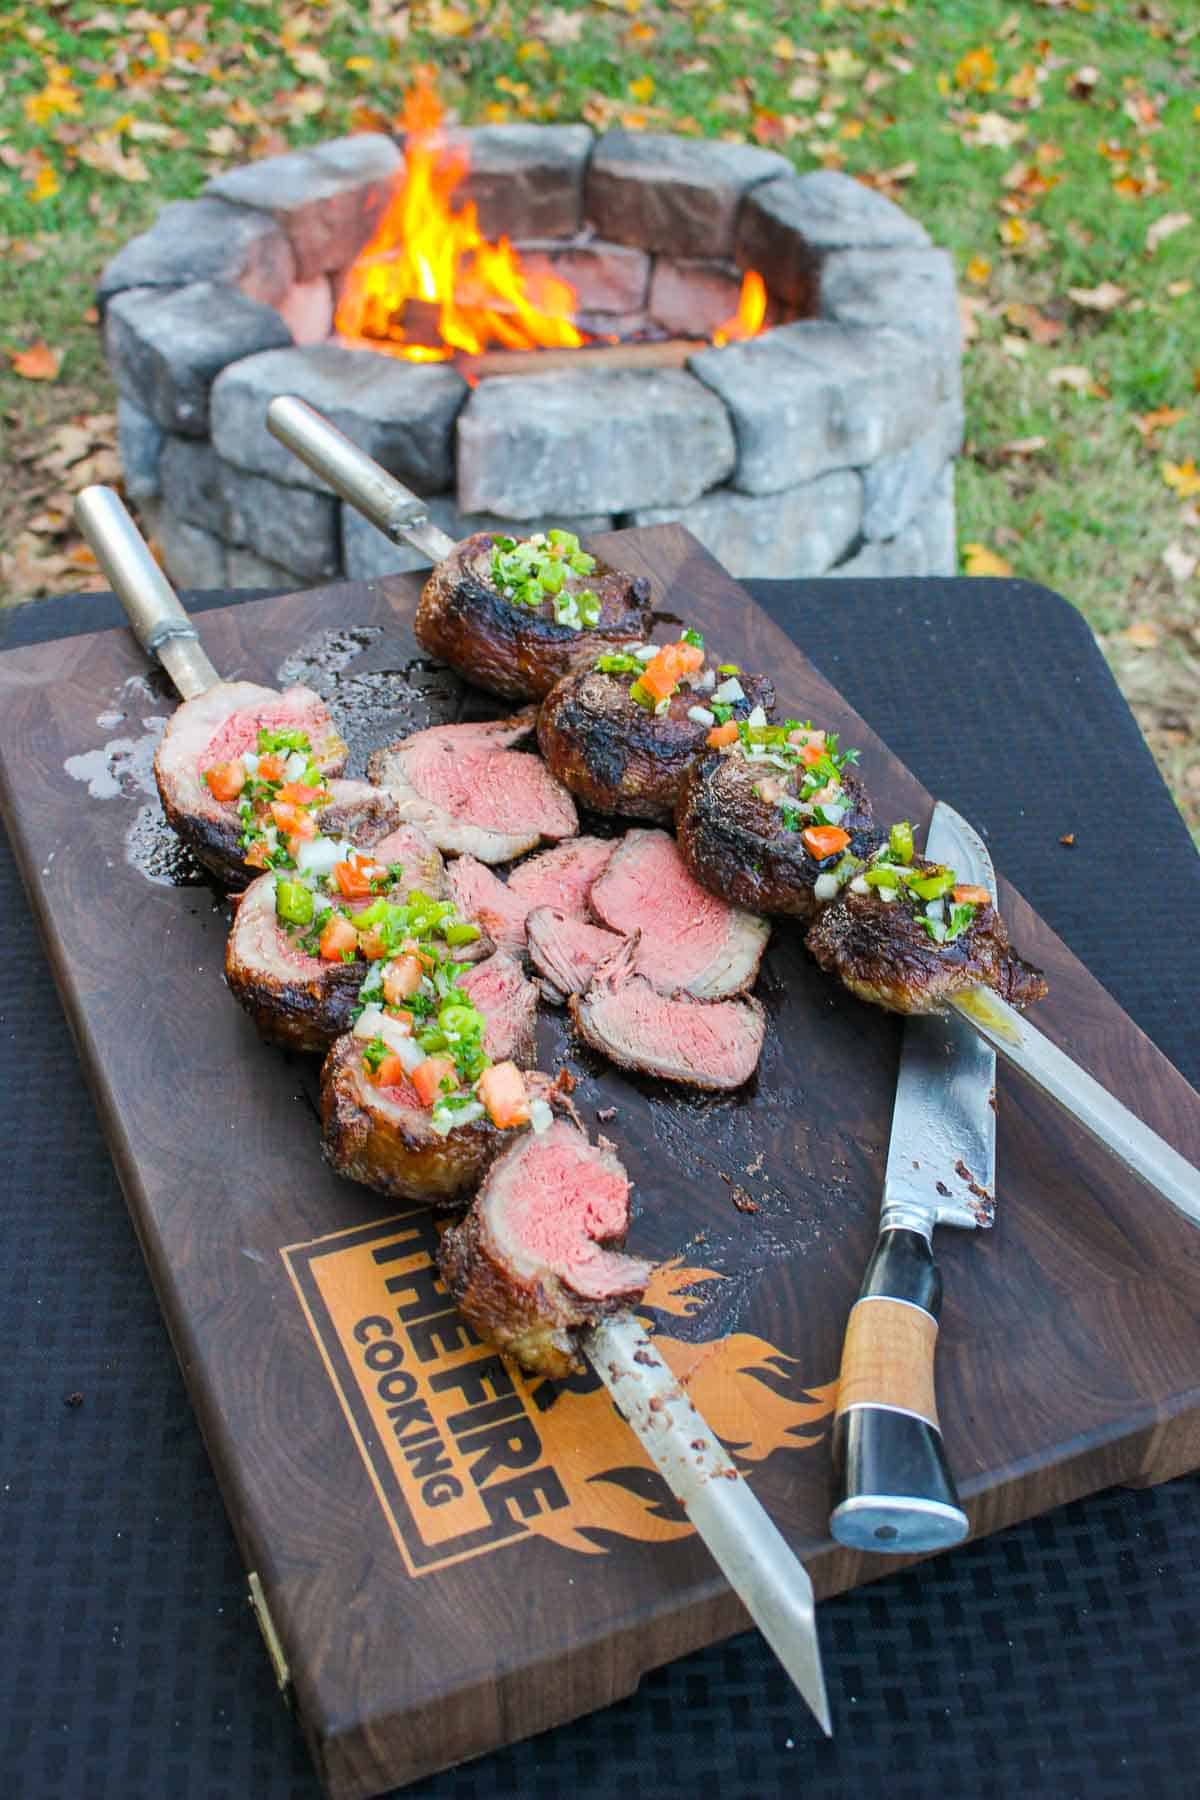 Skewered Picanha with Salsa Vinaigrette sliced and served.